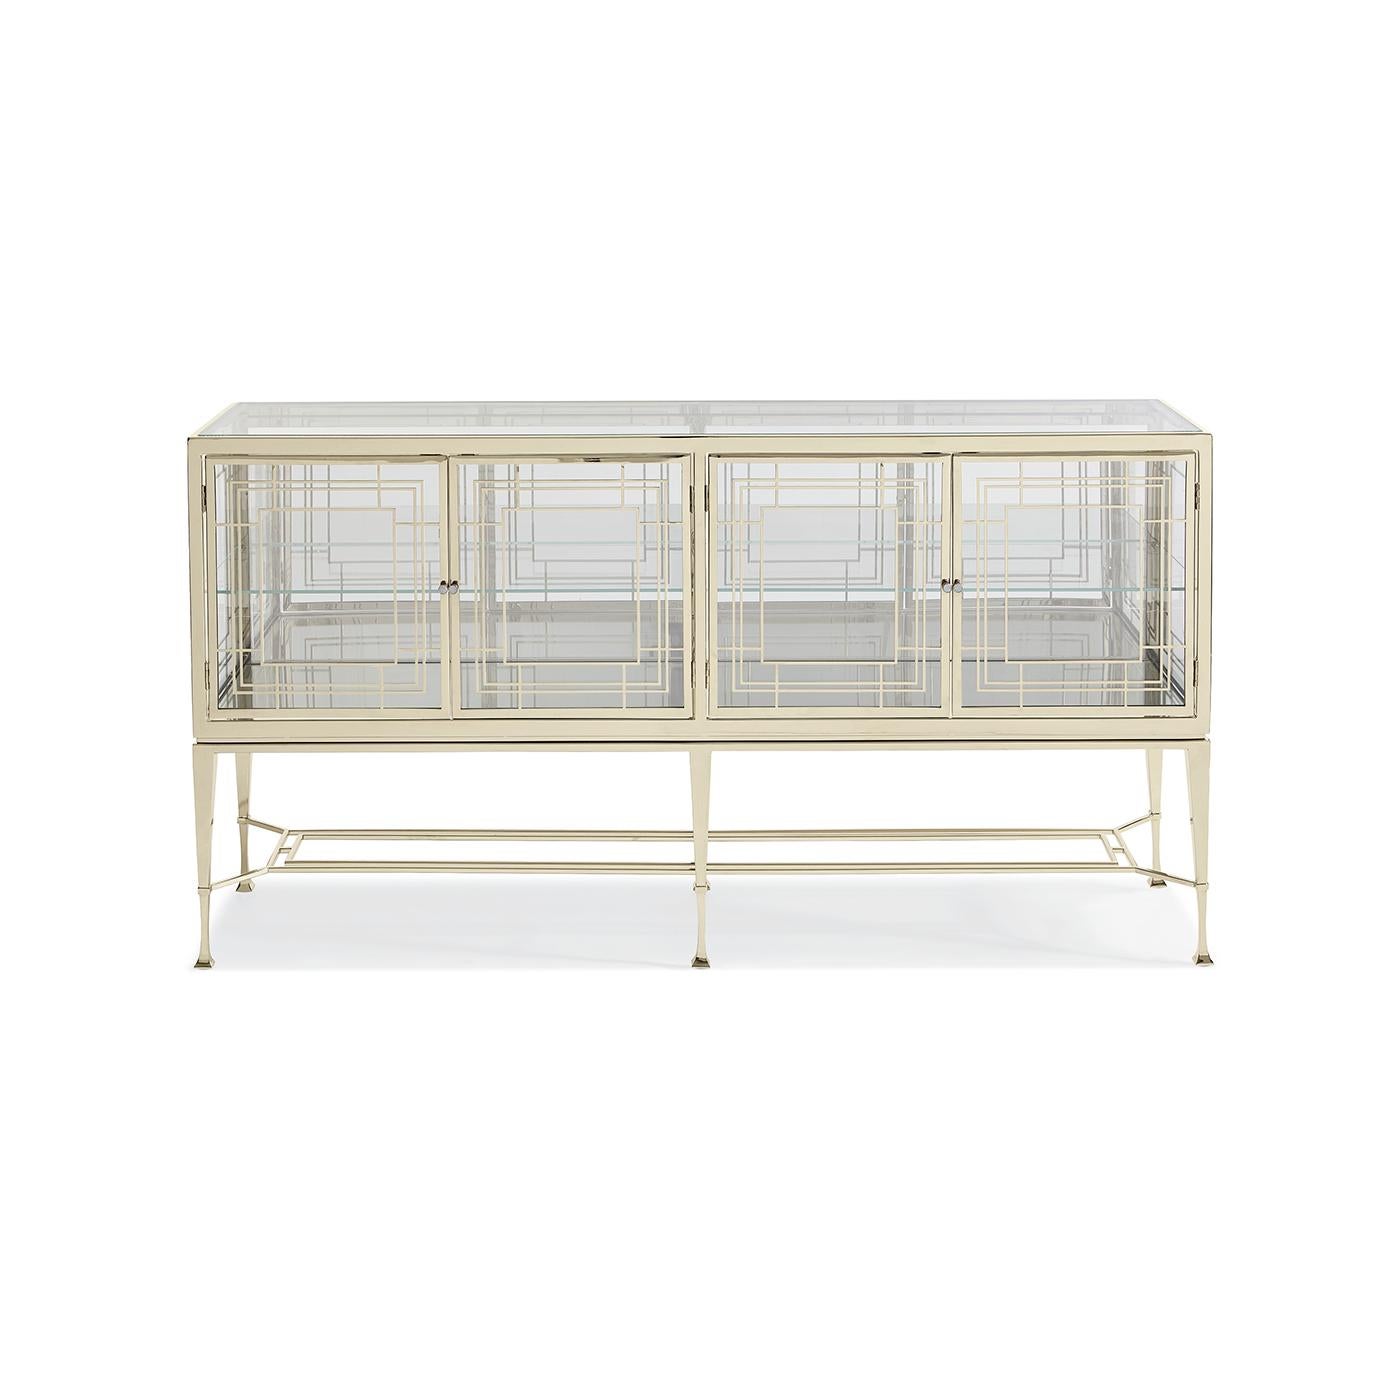 Mid-century glass sideboard, as glamorous as gold jewelry sparkling in the light, this brilliant glass sideboard reflects beauty from every angle. It’s crafted of clear glass panels and features a glass top, glass end panels, glass shelf and four